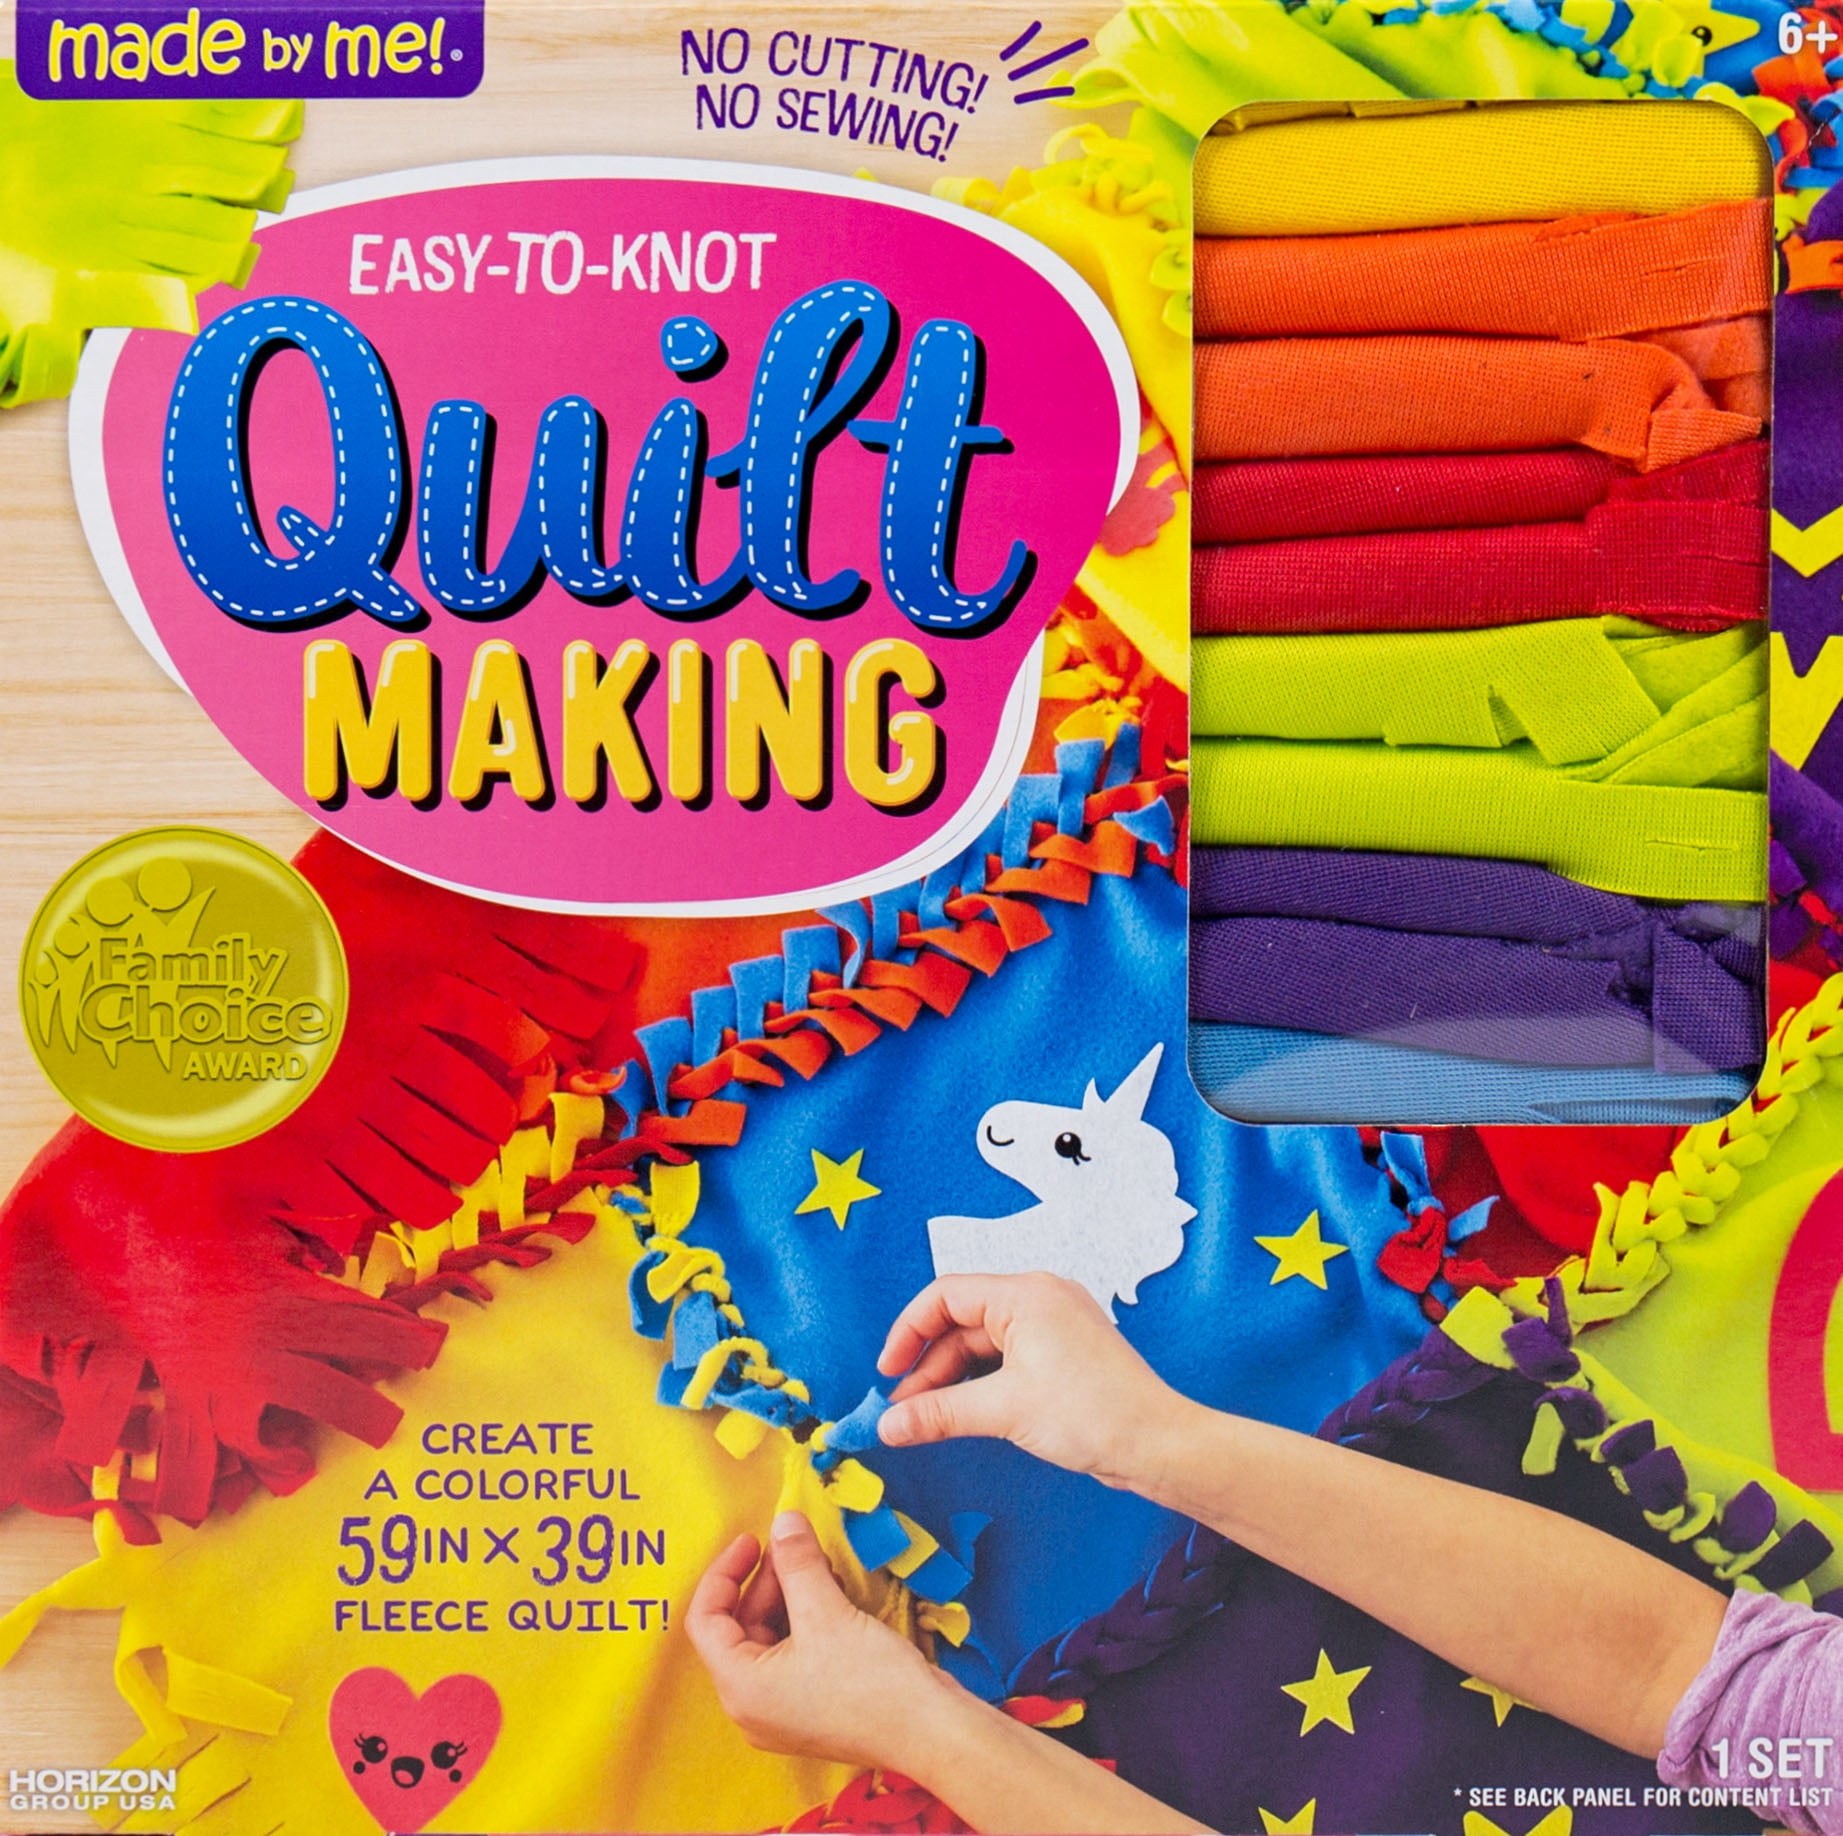 Made By Me Easy-to-Knot Quilt Making Kit, Colorful D.I.Y. Quilt, Art & Craft Kit for Boys & Girls, 6+